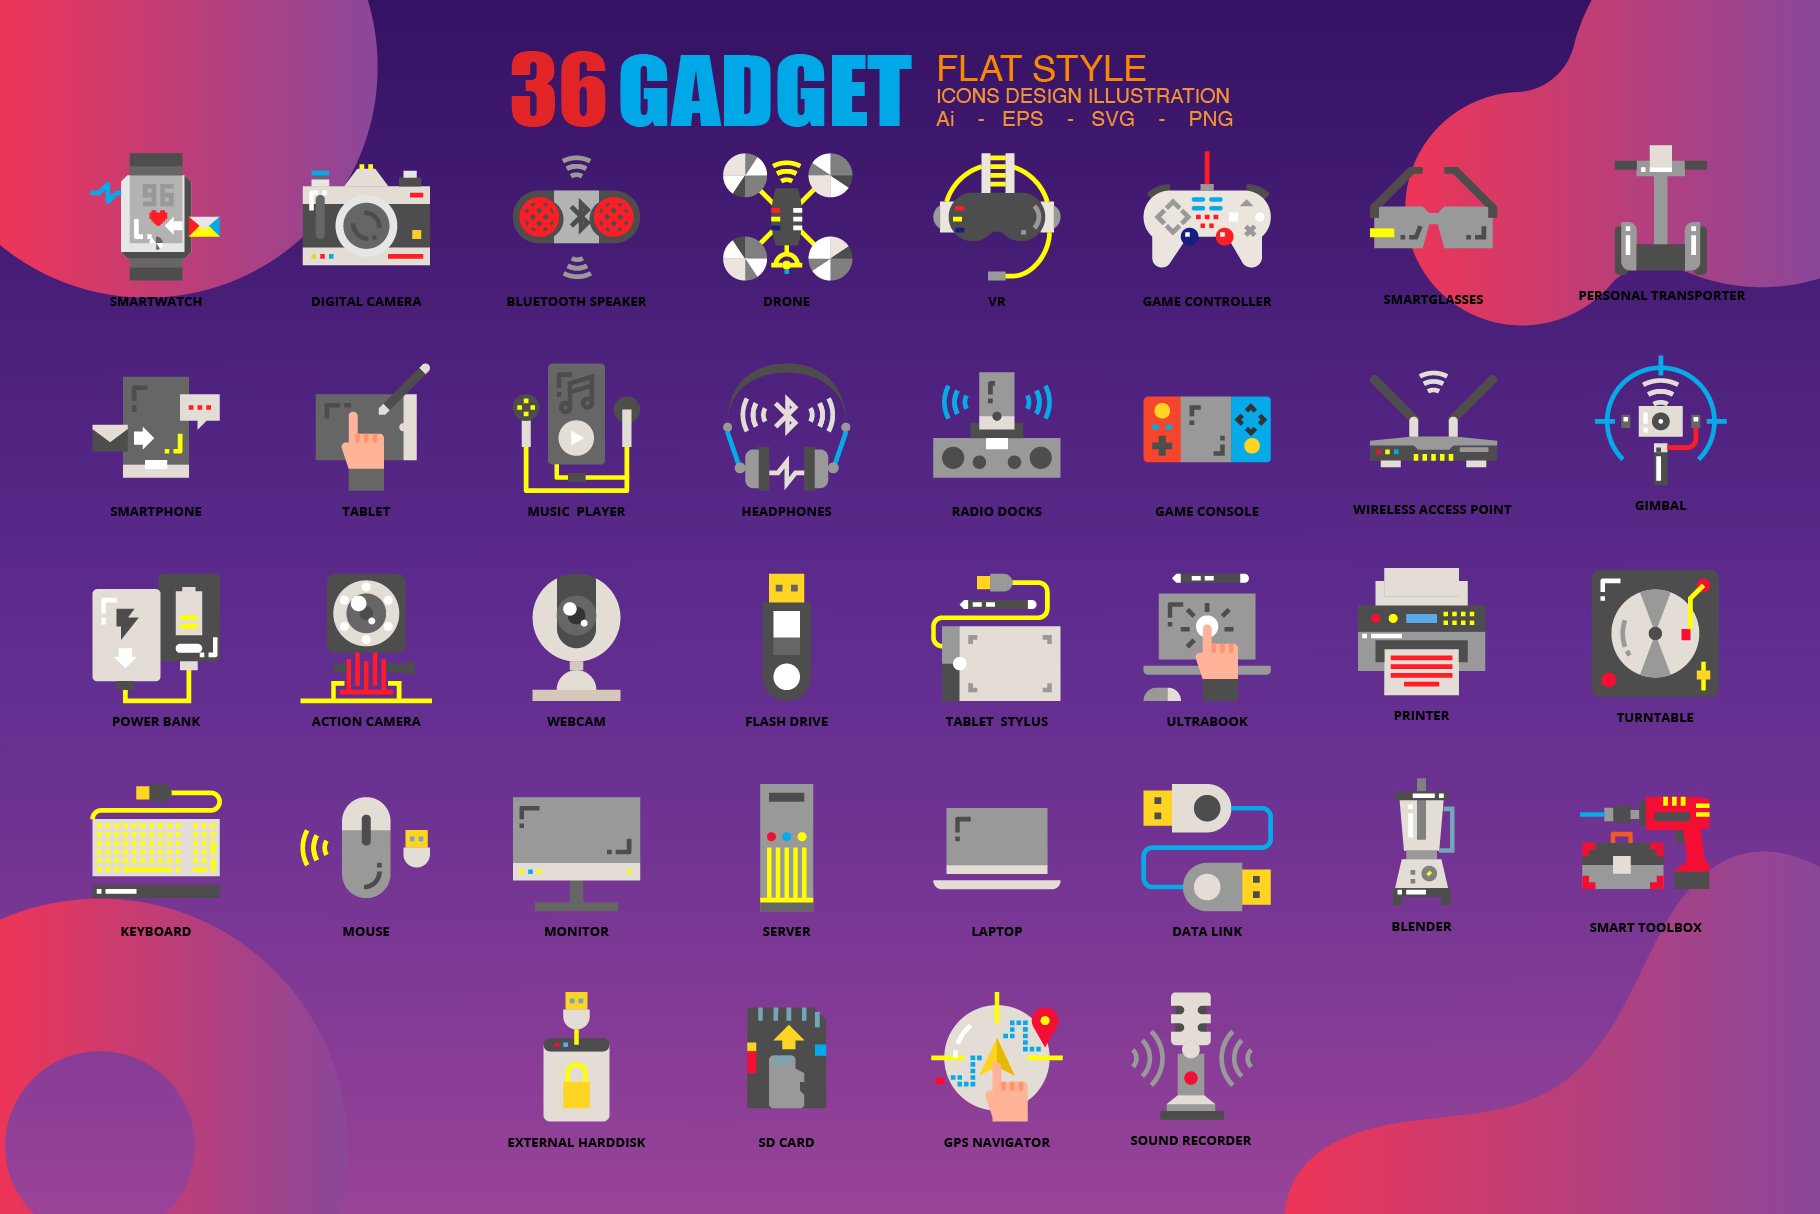 36 Gadget icons set x 3 Style preview image.